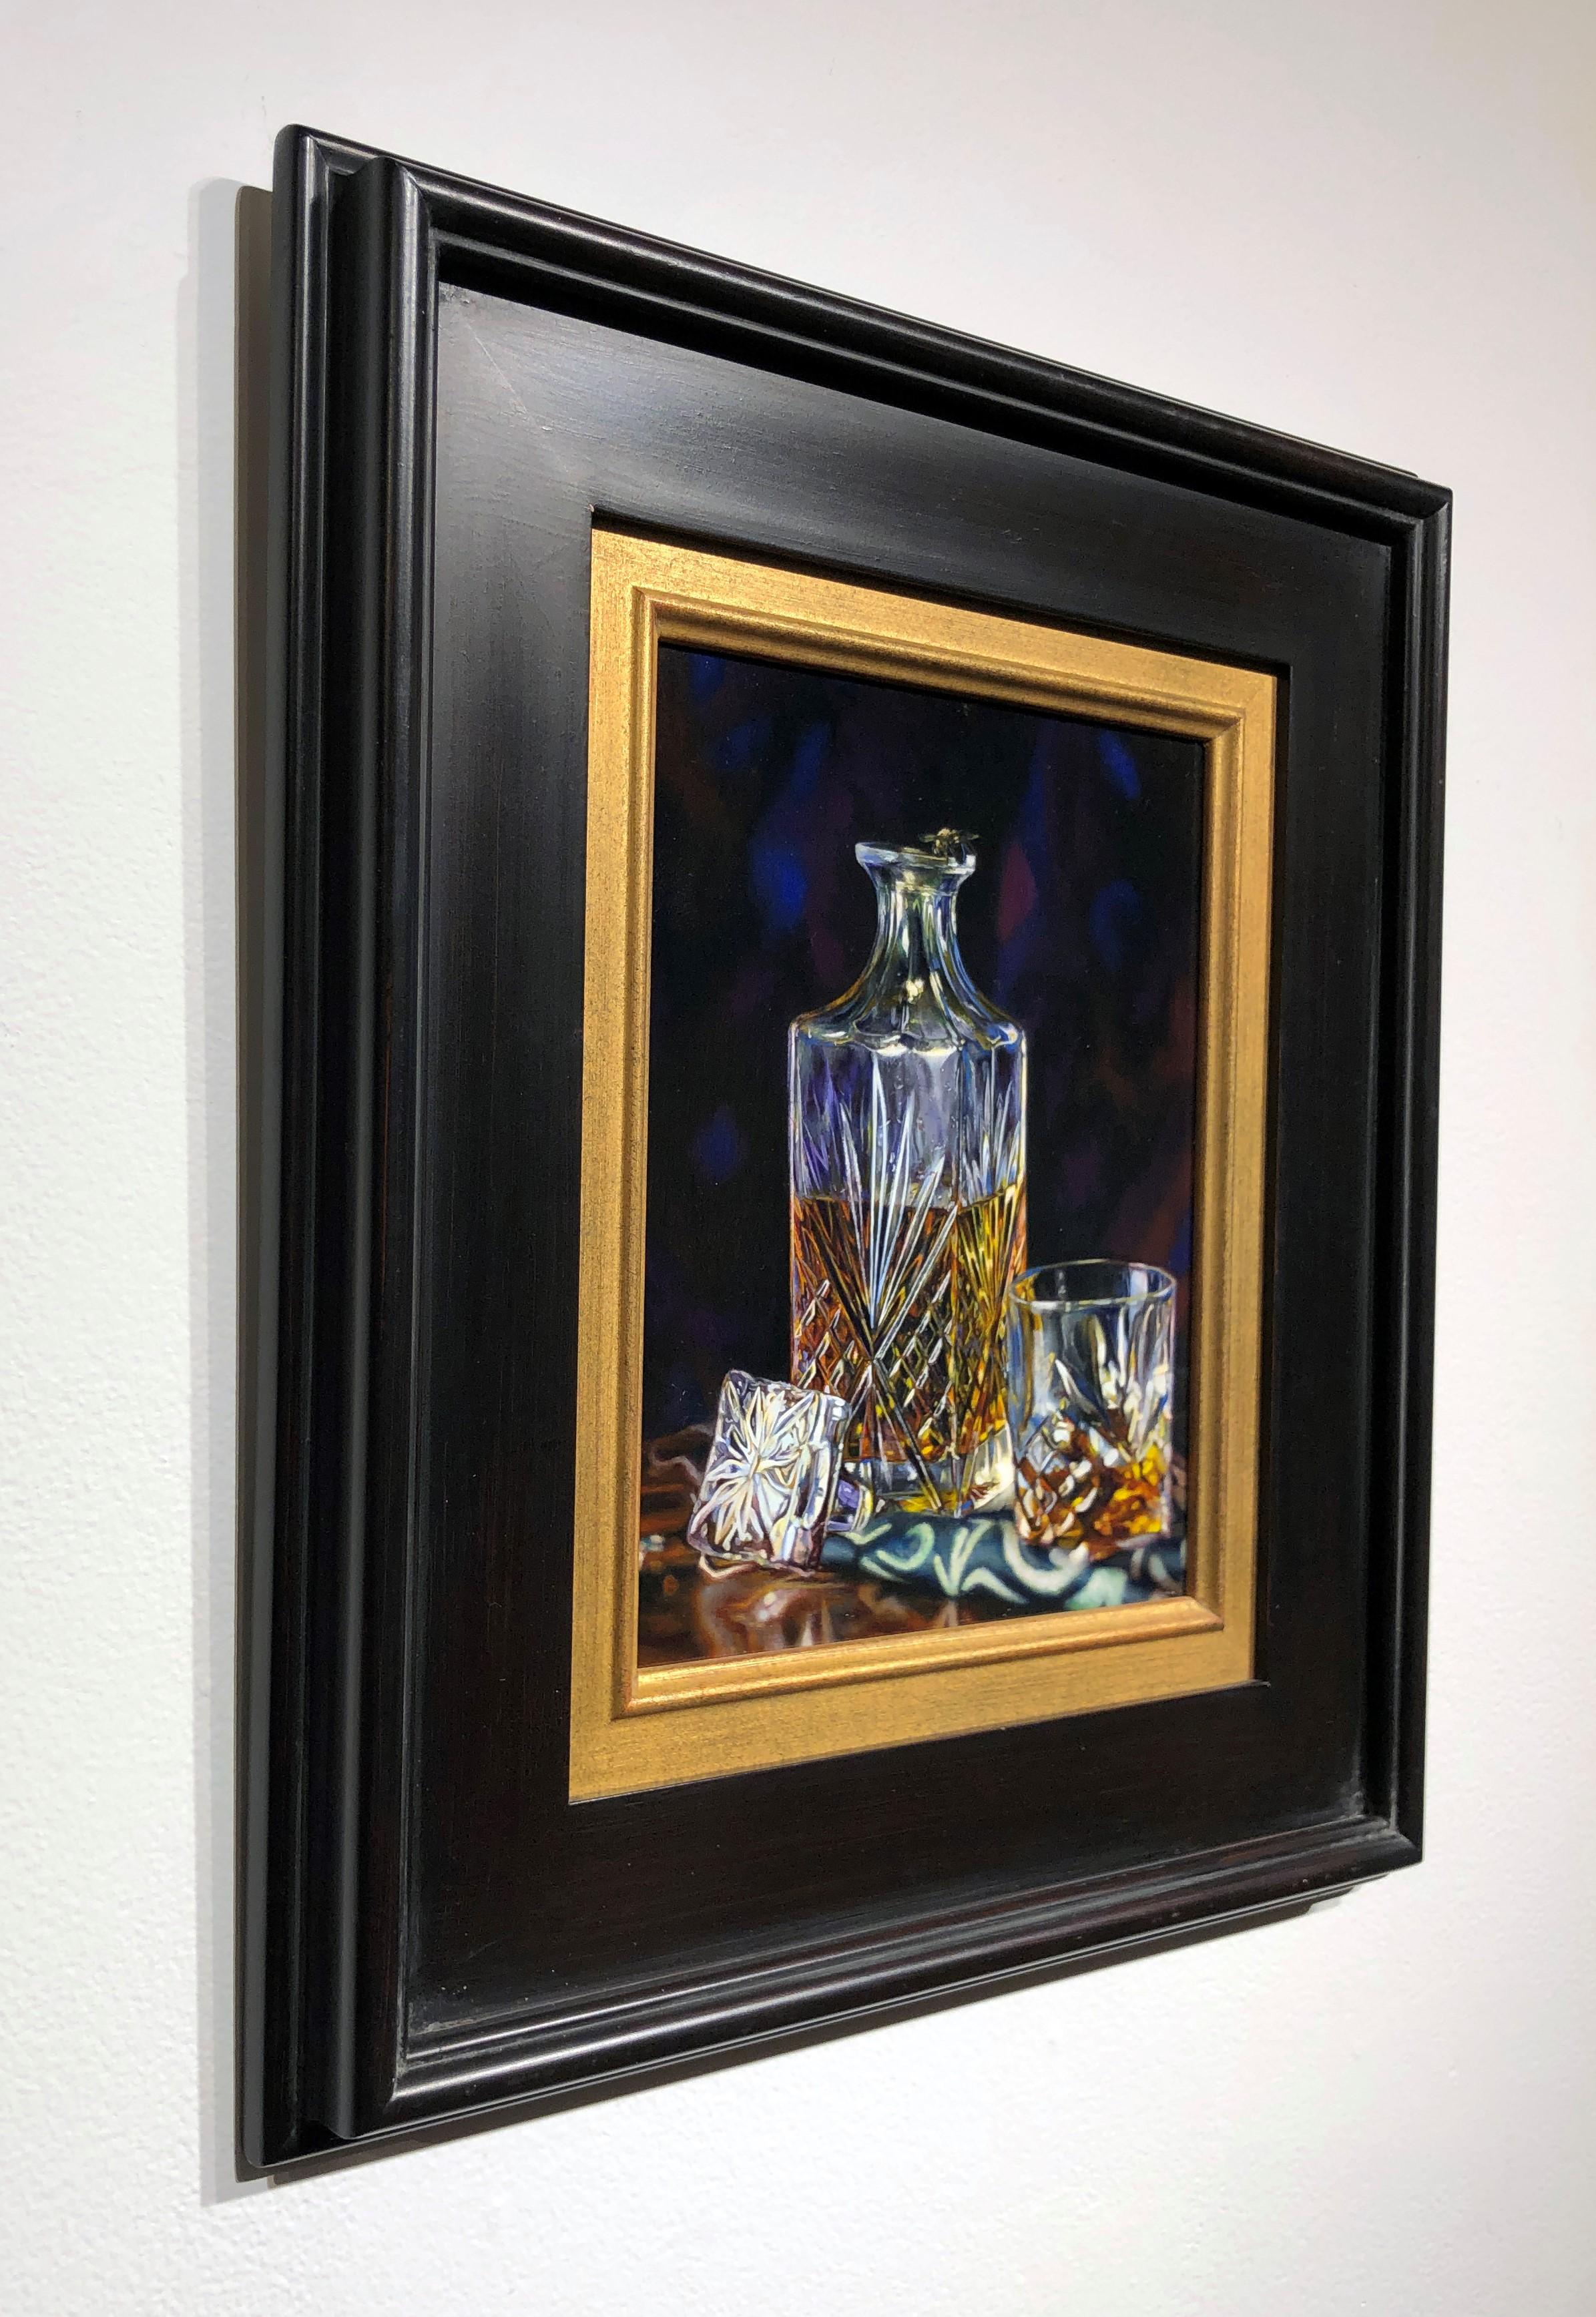 The Misunderstanding - Still Life with Honey Bee on Edge of Crystal Decanter - Black Still-Life Painting by Matthew Cook